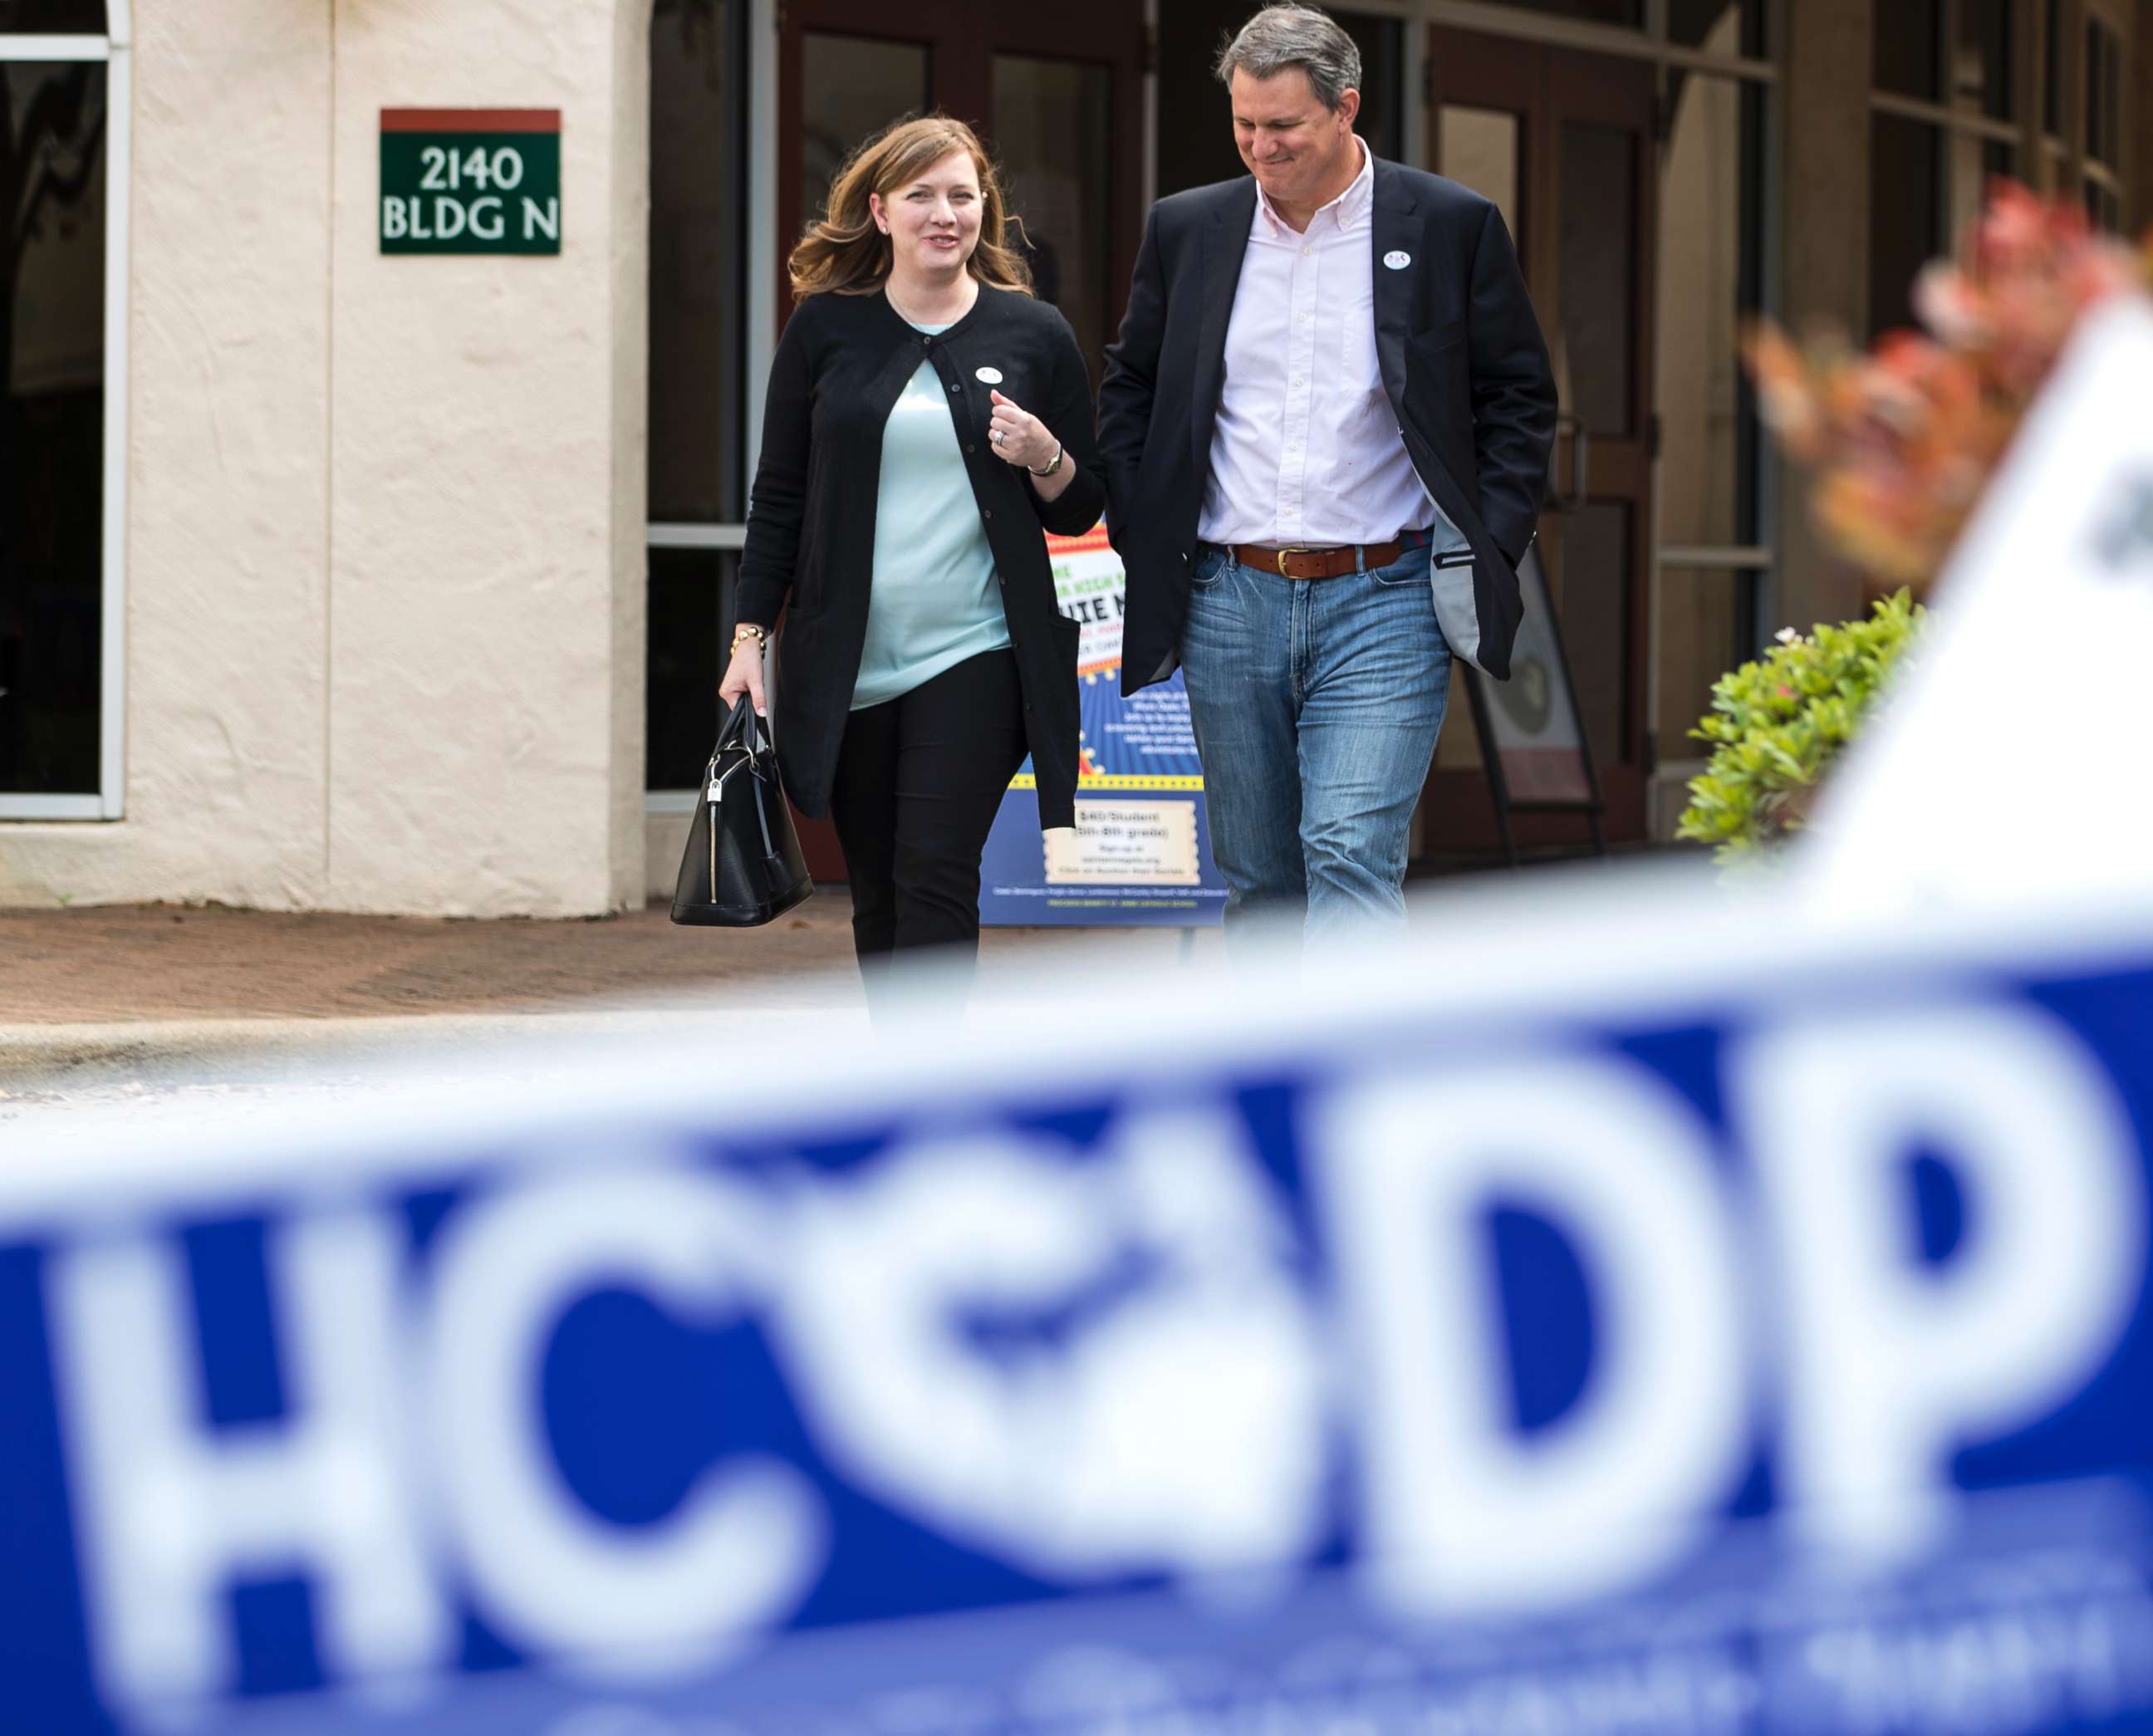 PHOTO: Lizzie Pannill Fletcher, a Democrat running for the 7th Congressional District seat in the U.S. House of Representatives, and her husband, Scott Fletcher, after voting in the primary election in Houston, March 6, 2018.